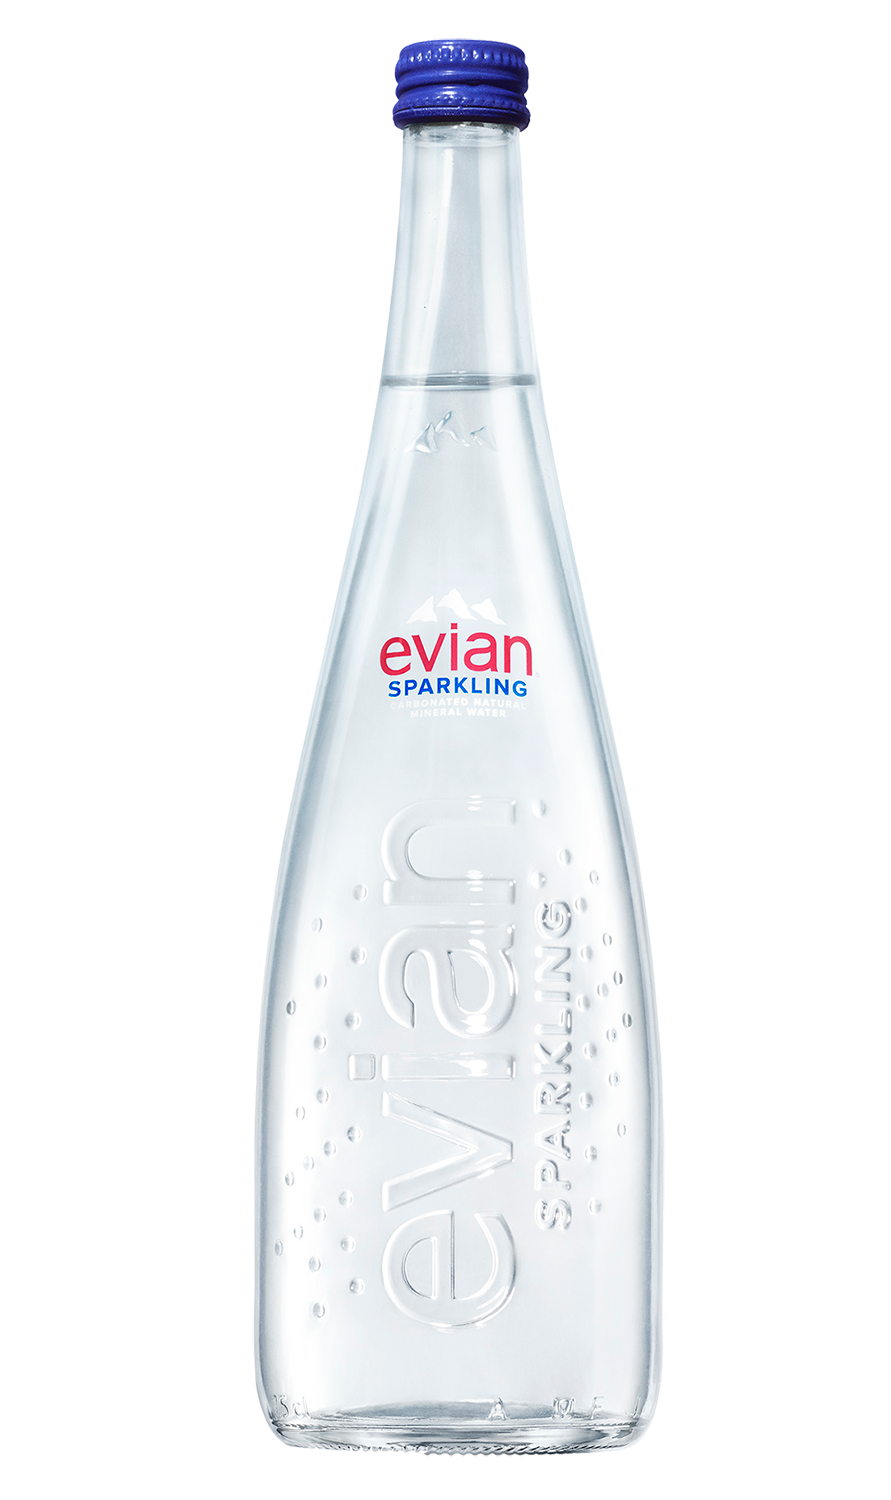 evian Sparkling carbonated water